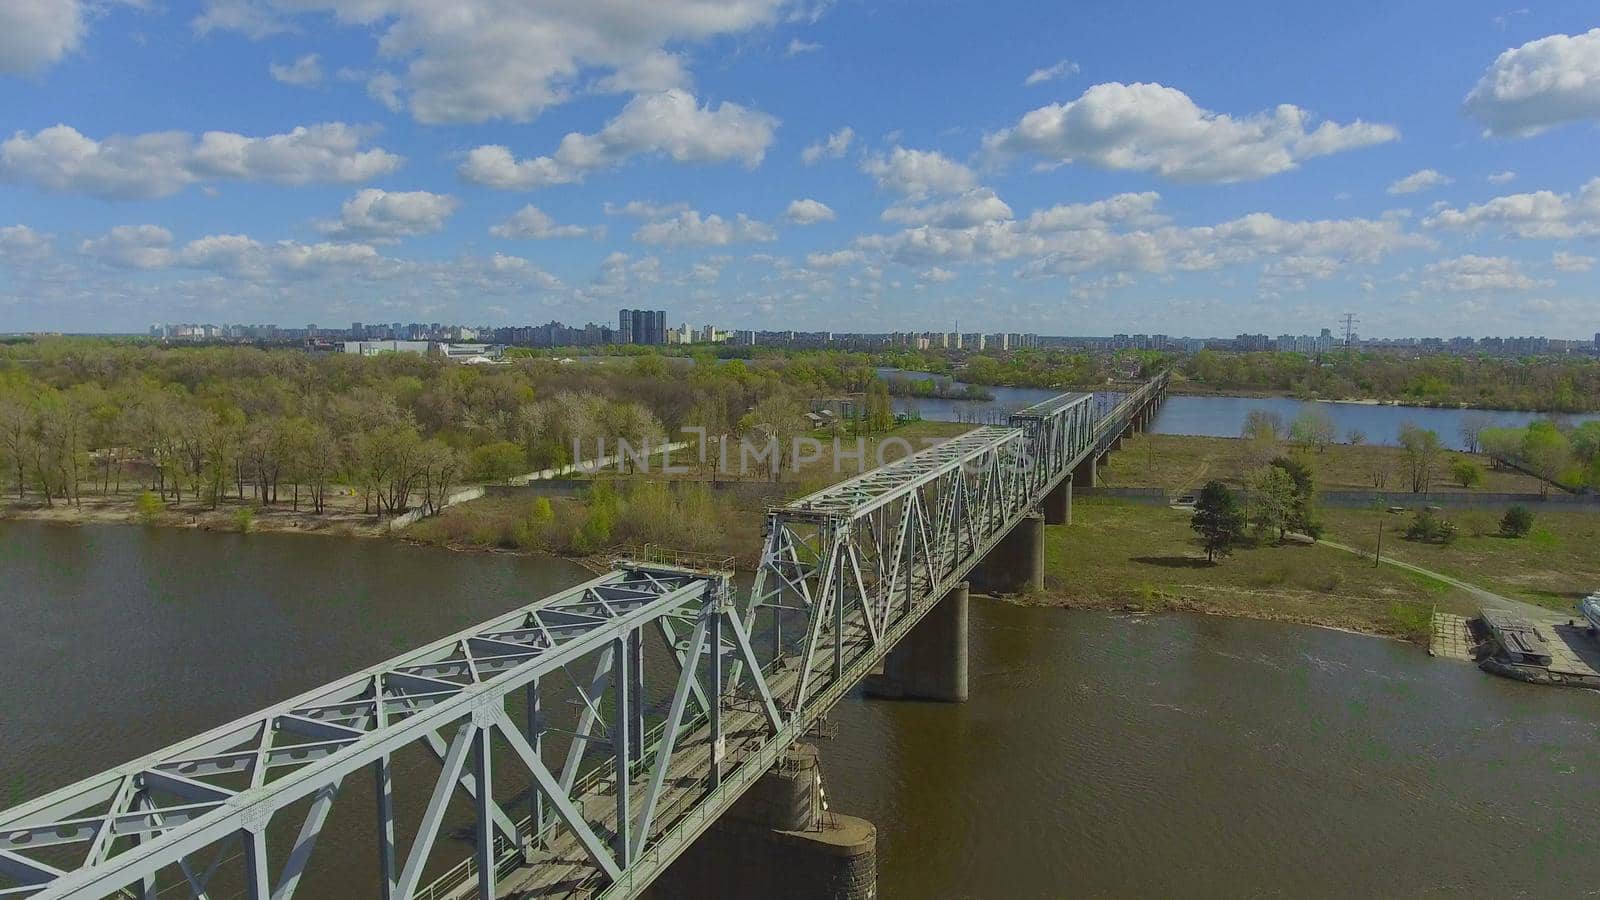 aerial view on the kyiv in spring season. Top scene on the bridge over river.